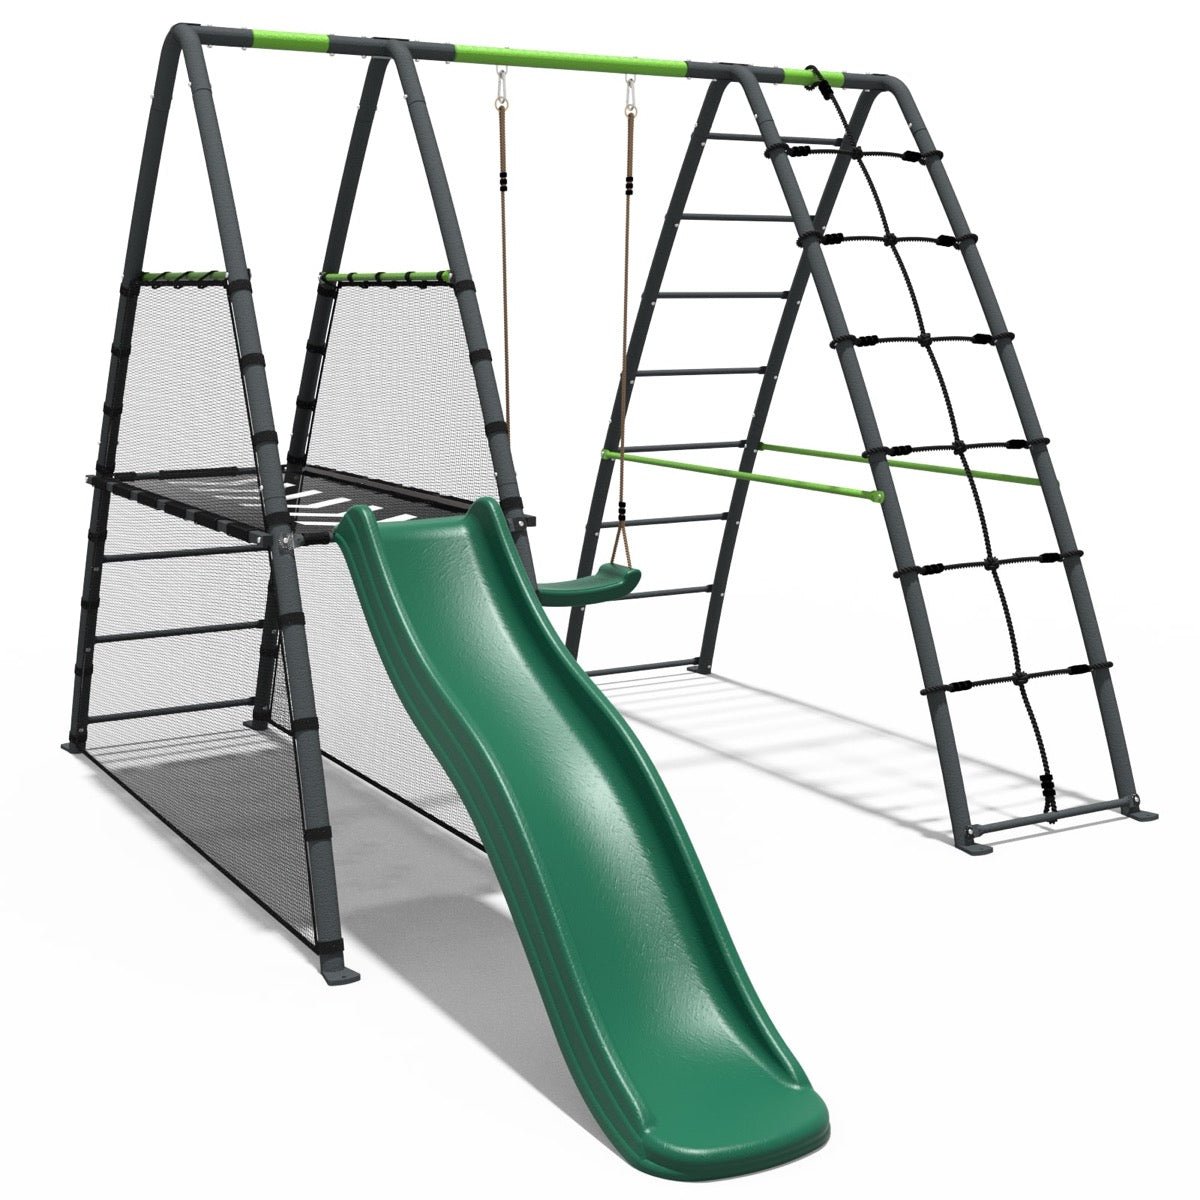 Rebo Steel Series Metal Swing Set + Up and Over wall & 6ft Slide - Single Green